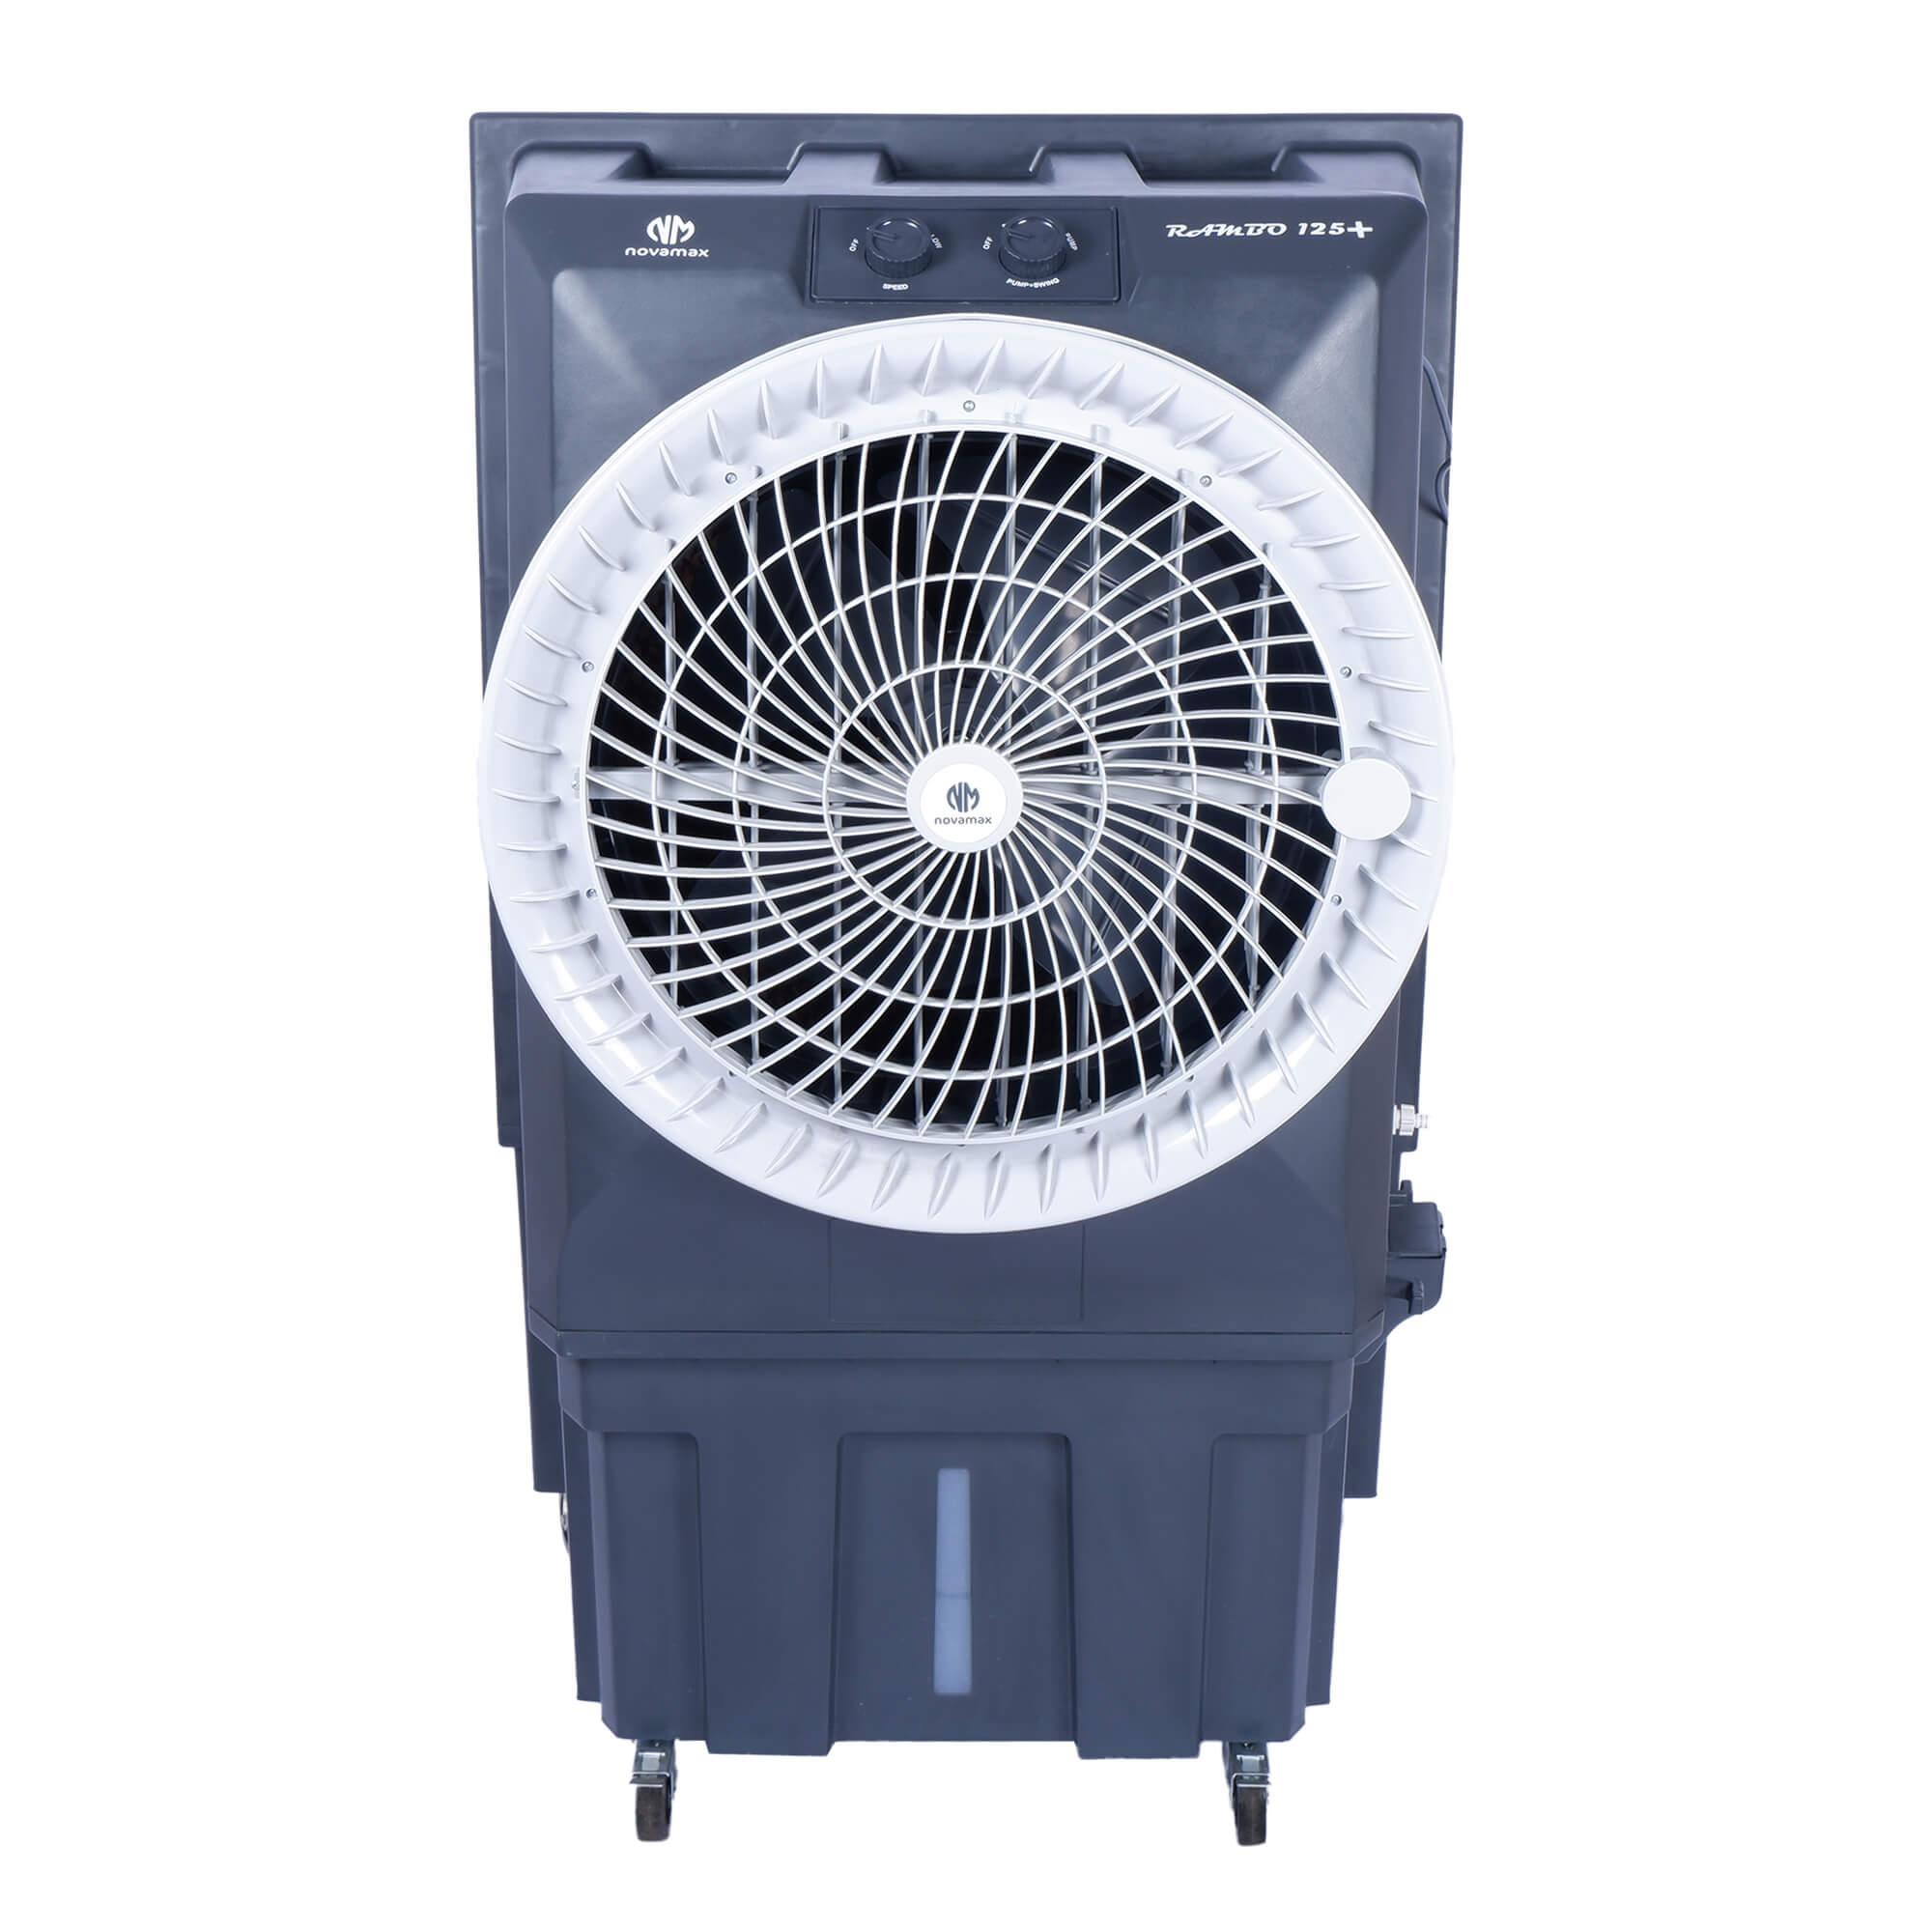 Rambo 125 Plus (Grey, Rambo 125 Ltr Plus Desert Air Cooler With Honeycomb Cooling & Auto Swing Technology)